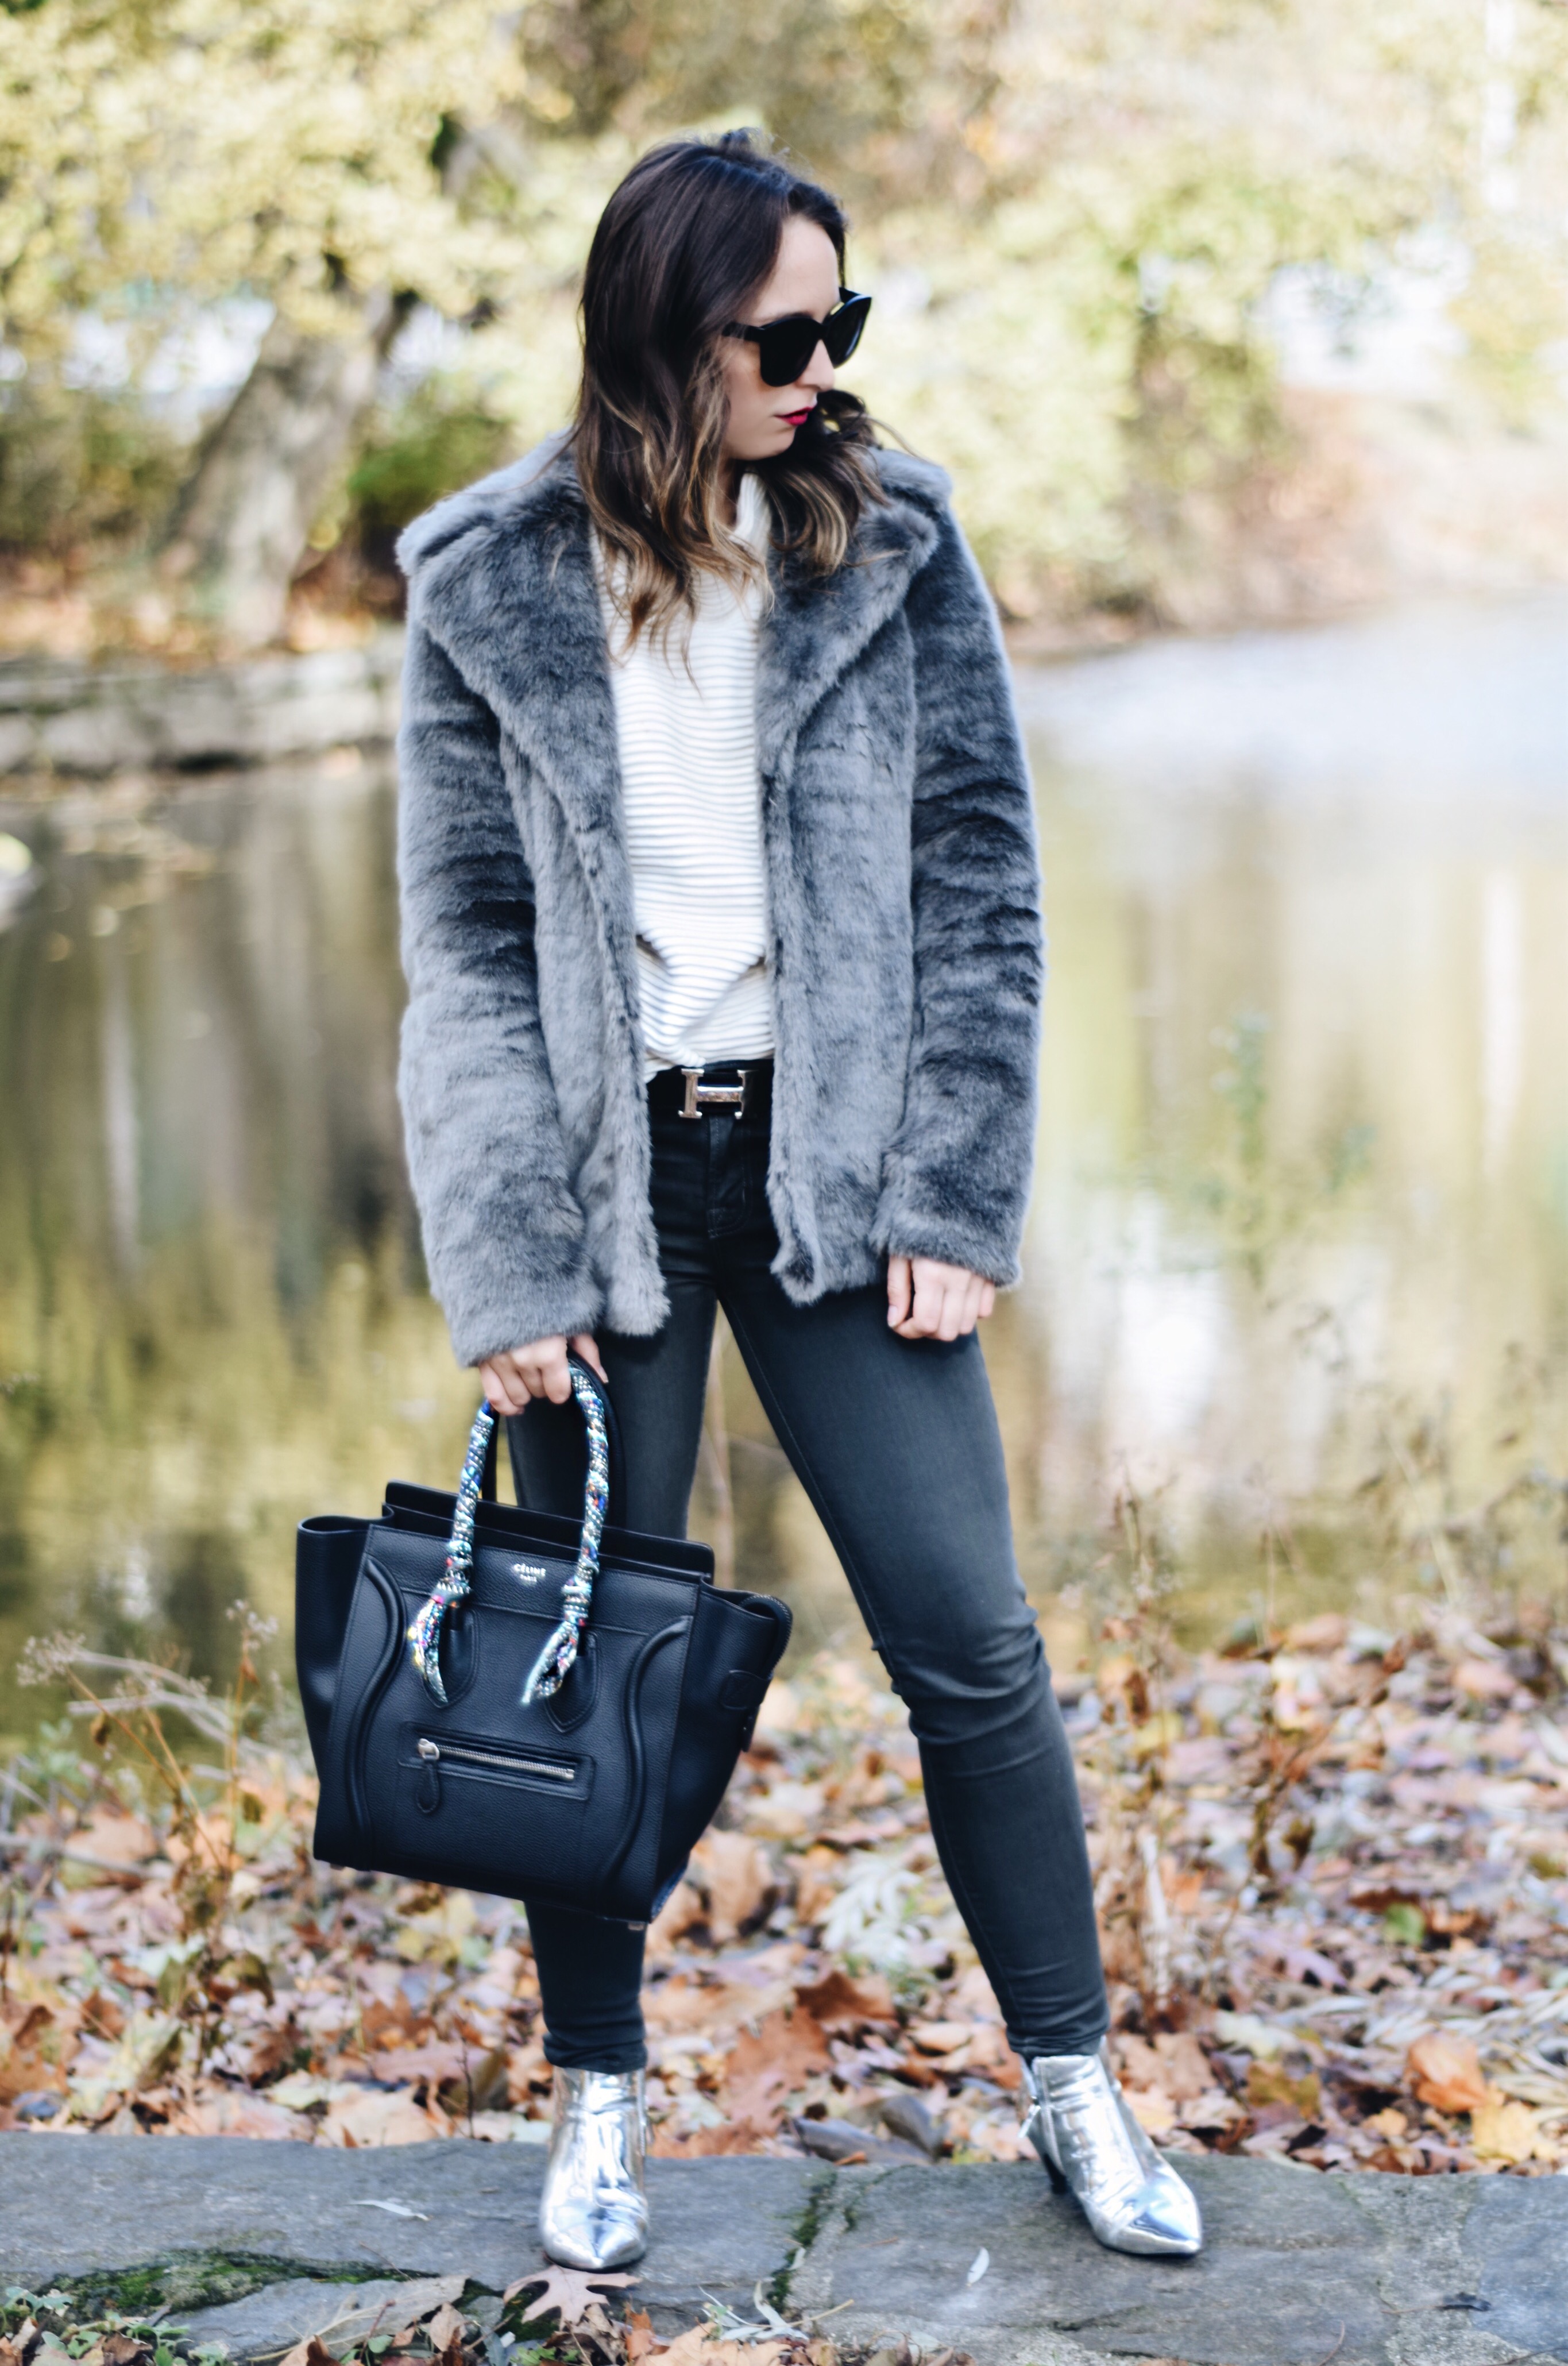 Style-faux fur coat-unreal fur-outfit-ny-Street style-blogger-silver booties